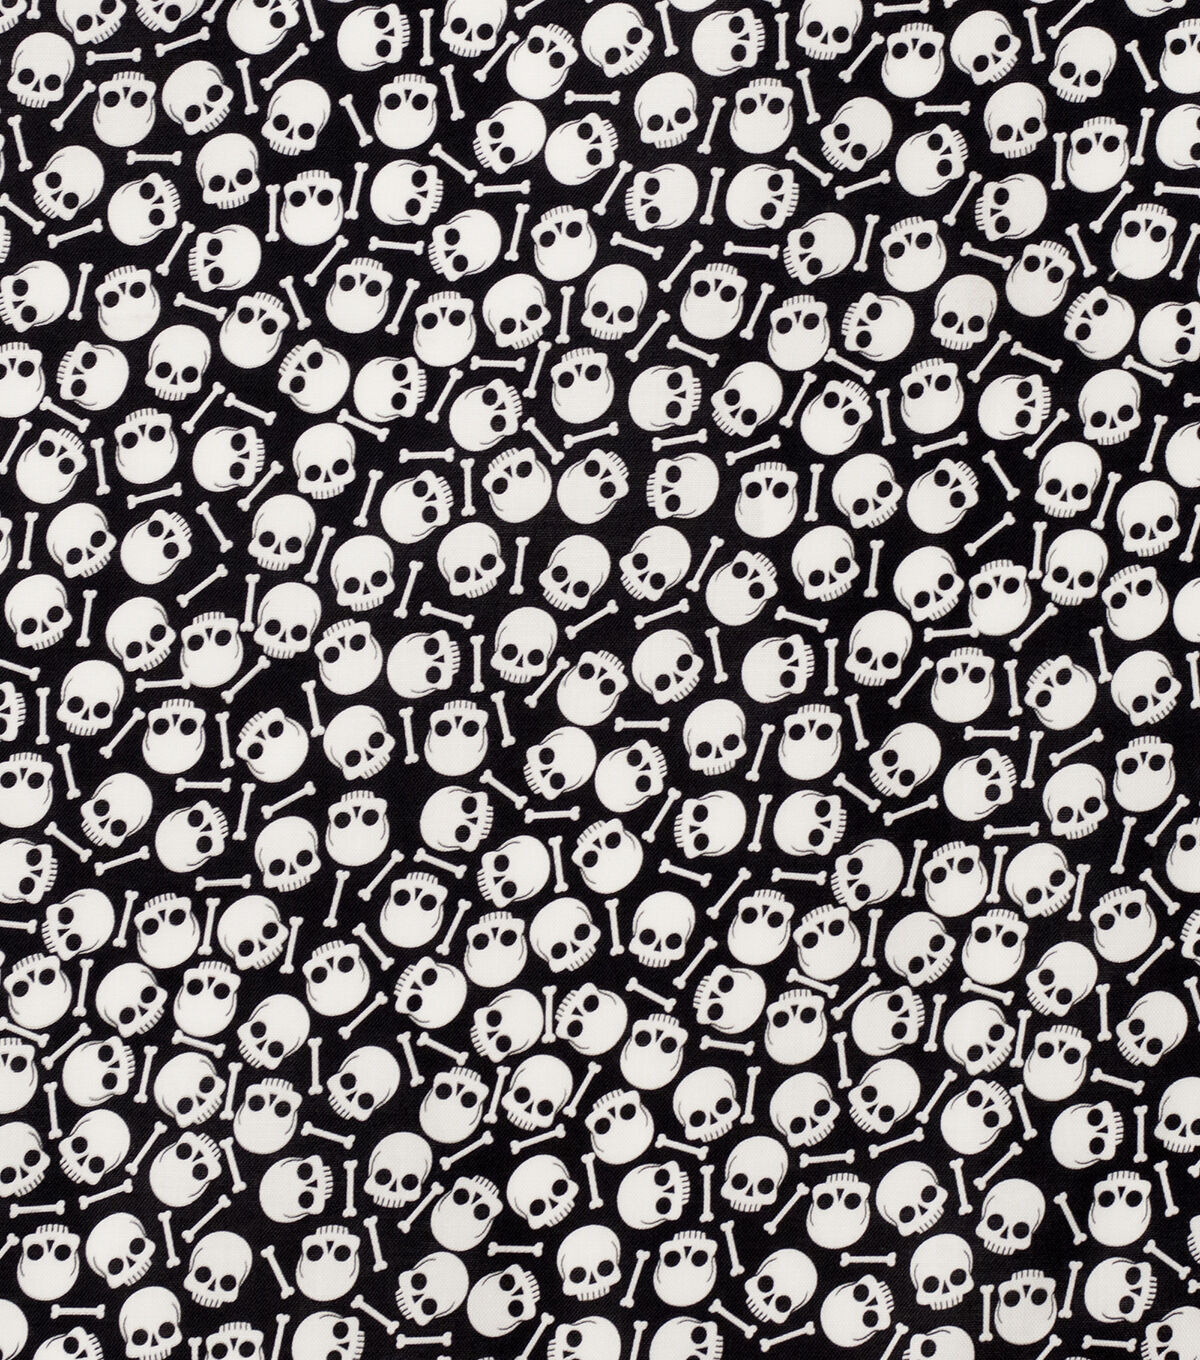 Halloween Mini Tossed Skulls & Bones 100% Cotton Fabric Select Your Size or By The Yard